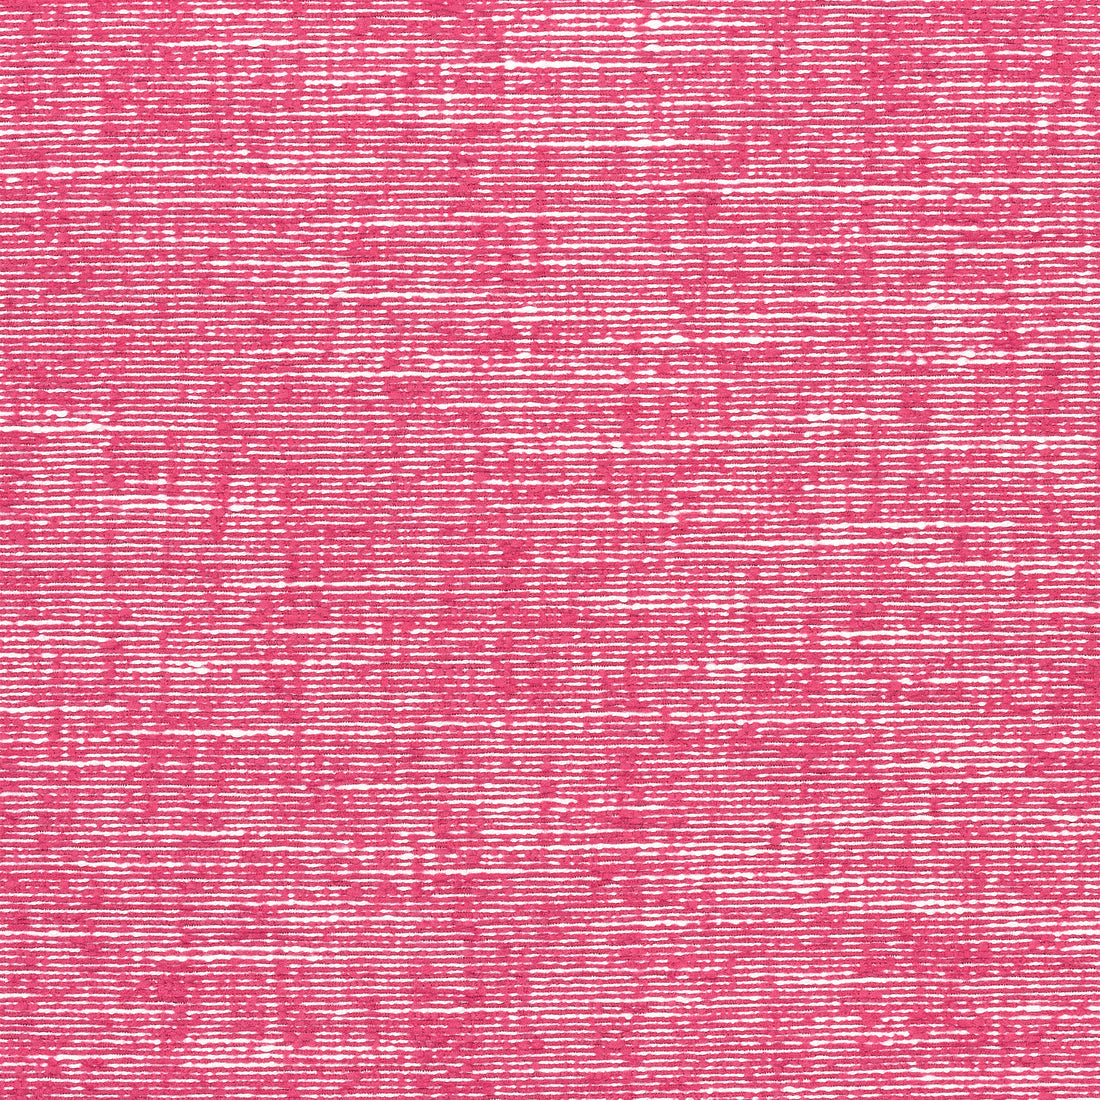 Freeport fabric in magenta color - pattern number W74603 - by Thibaut in the Festival collection